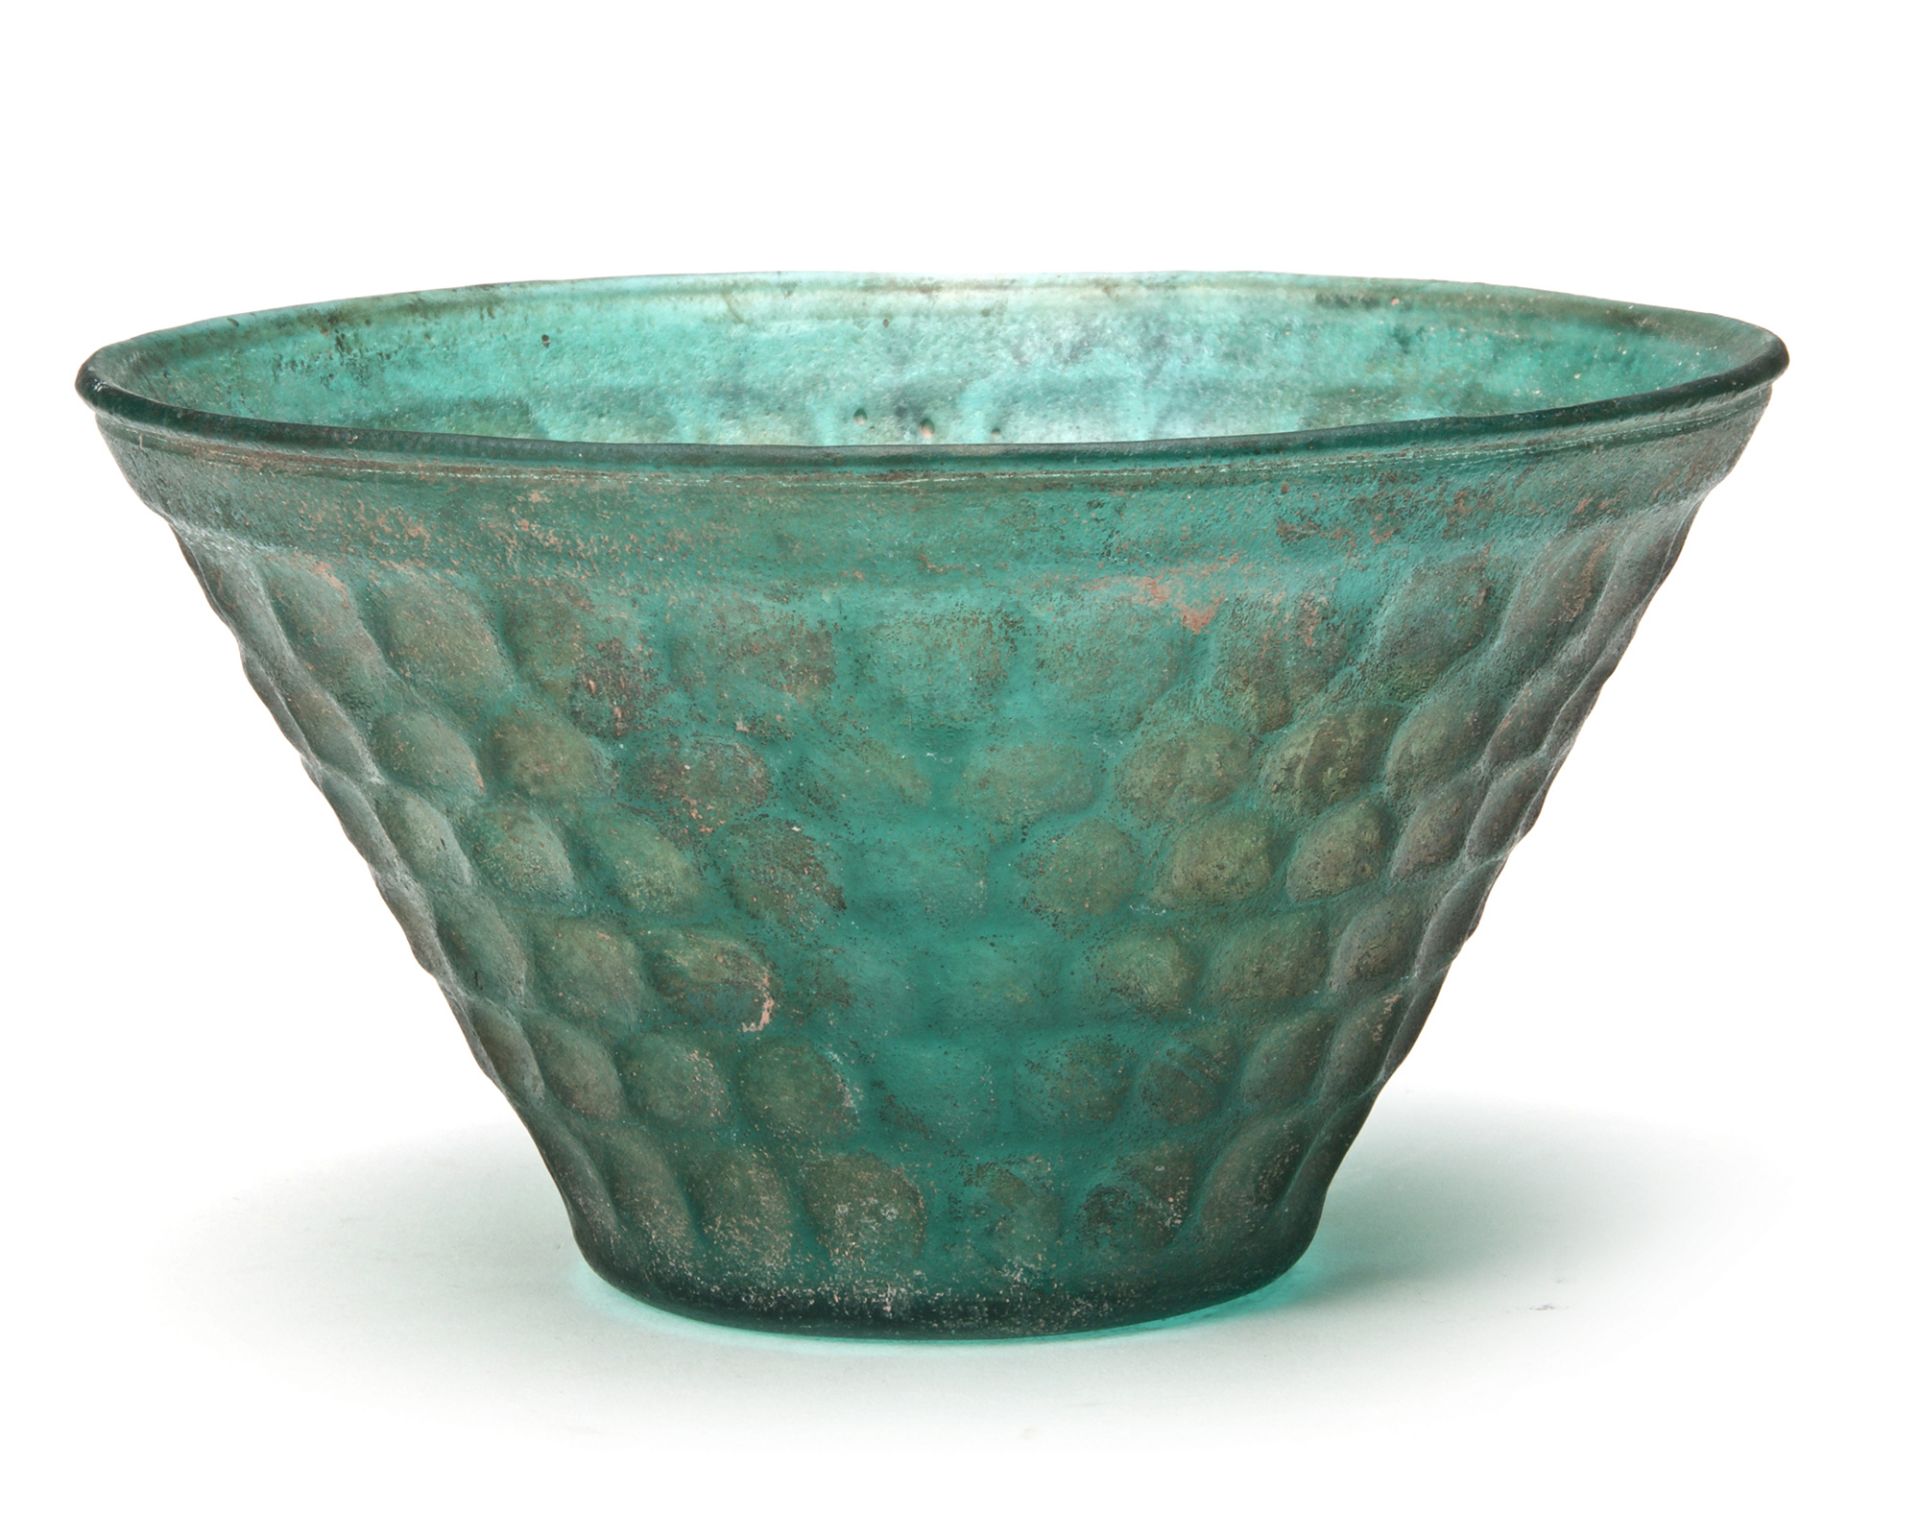 A PERSIAN GREEN CUT GLASS BOWL, 8TH-9TH CENTURY - Image 2 of 10